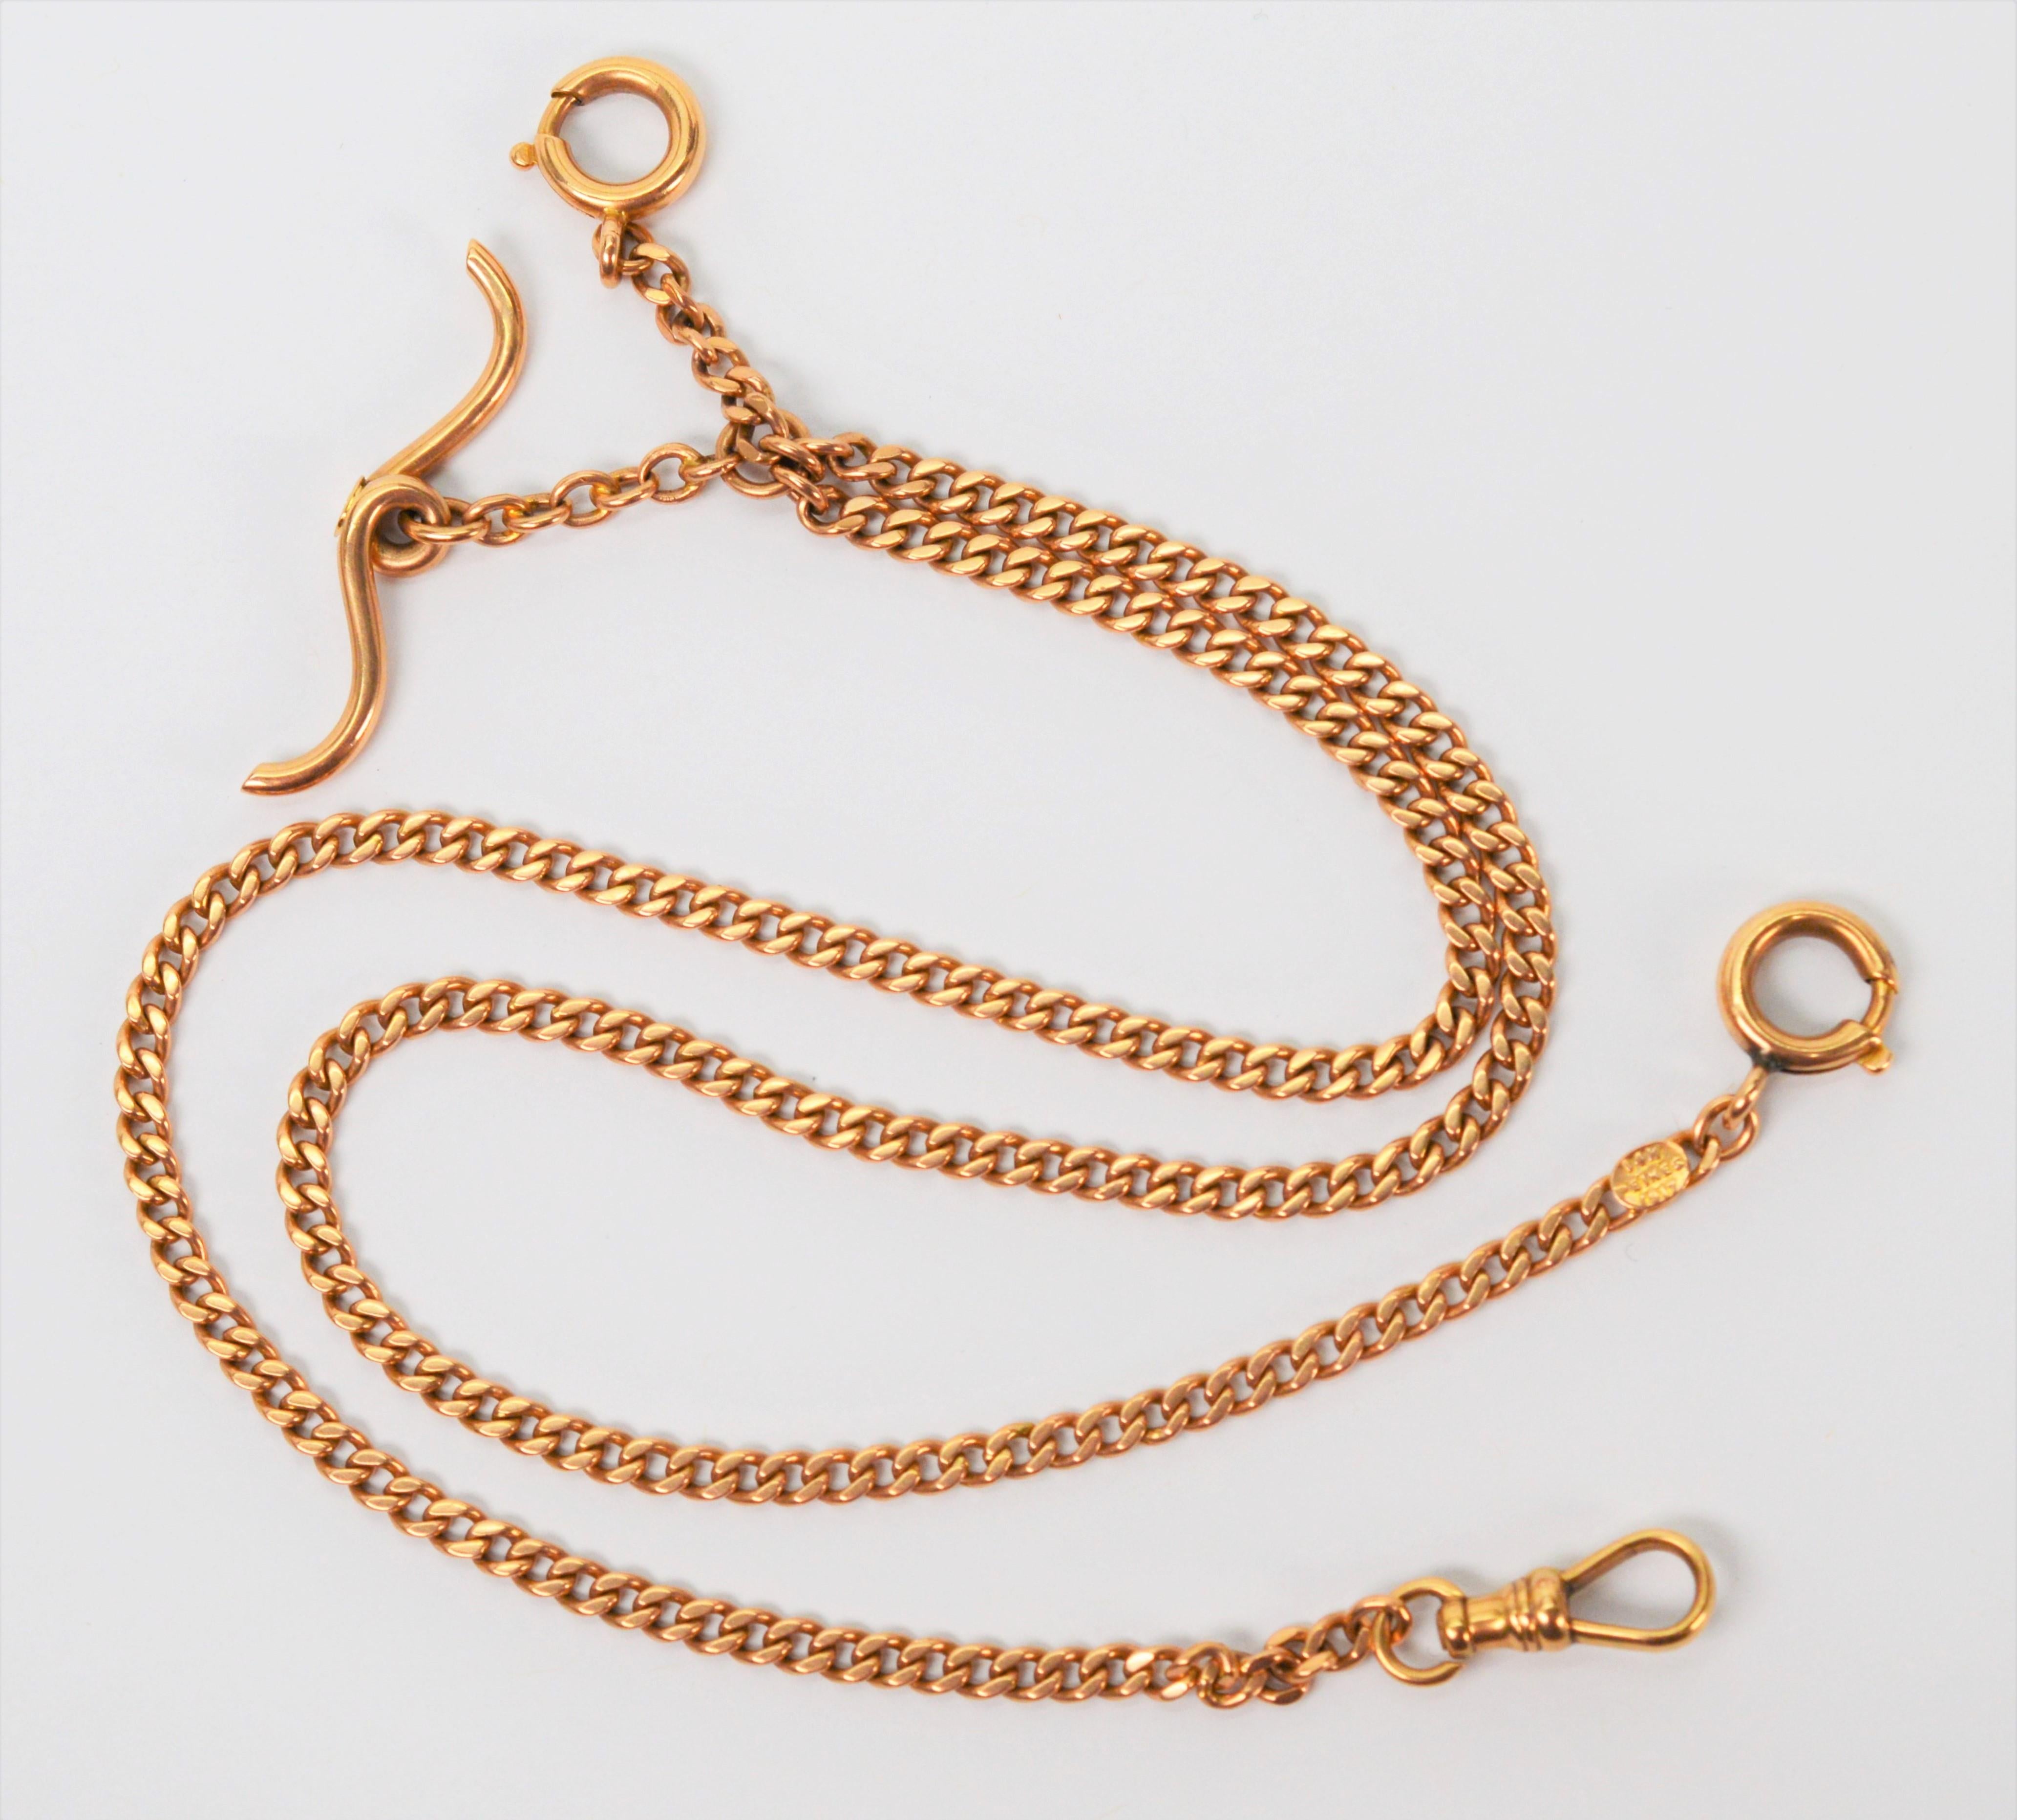 In fourteen karat 14k yellow gold, this 20 inch double Albert Watch chain has two twenty inch chains off the T bar, with one intended for your favorite pocket watch and the other possibly intended for your keys. On this antique piece, there is a